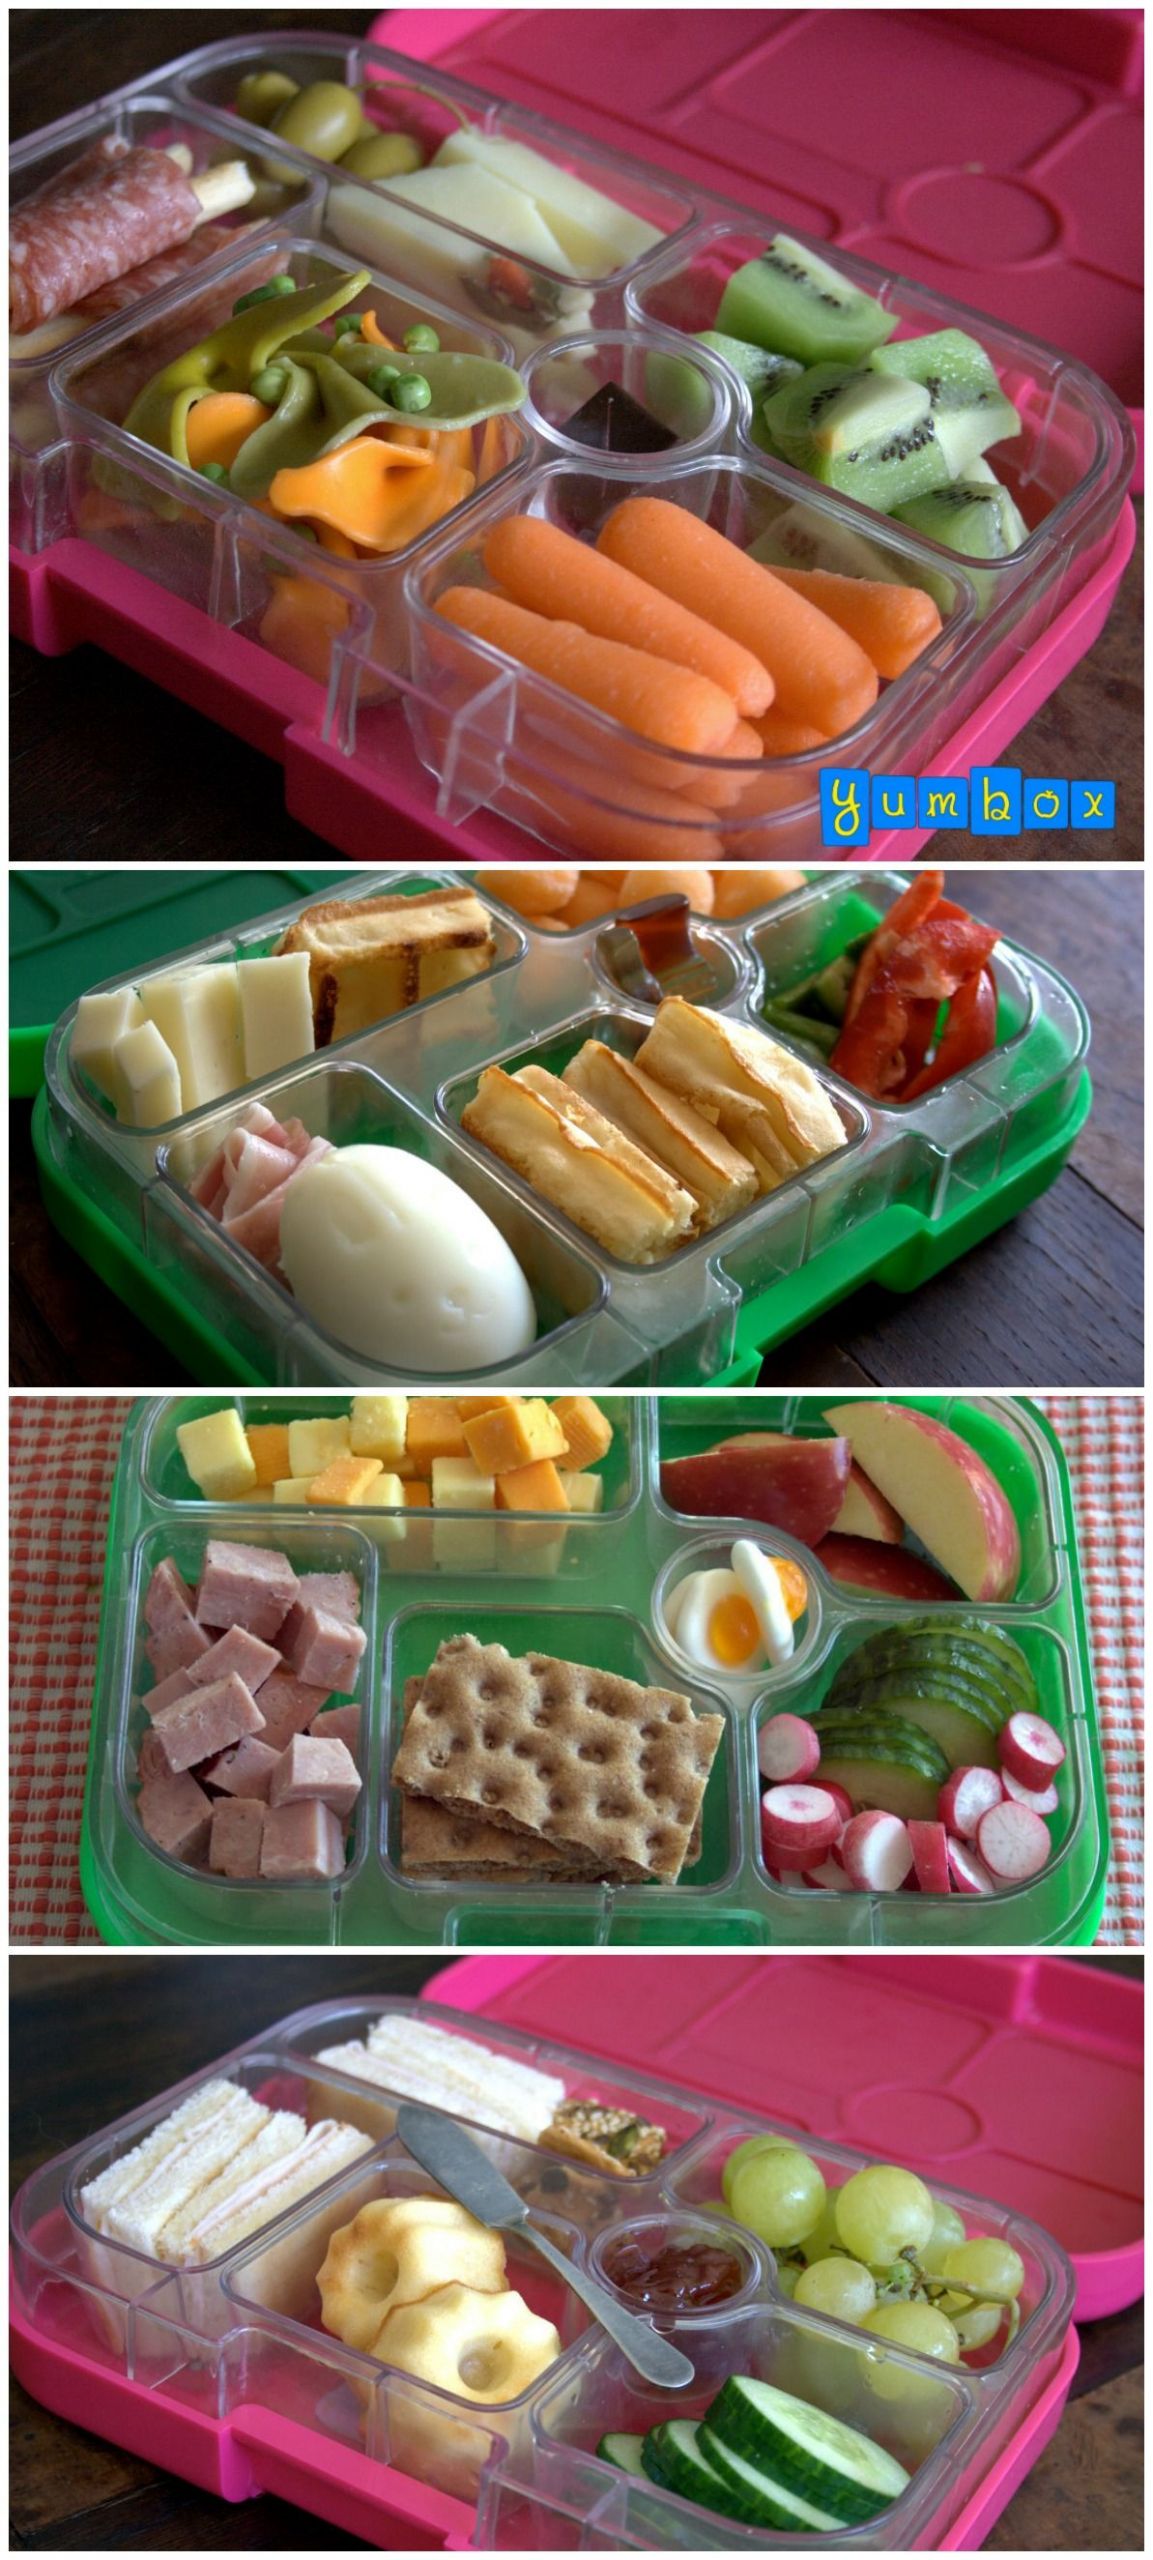 Easy Healthy Packed Lunches
 Tips for simple healthy and delicious packed school or